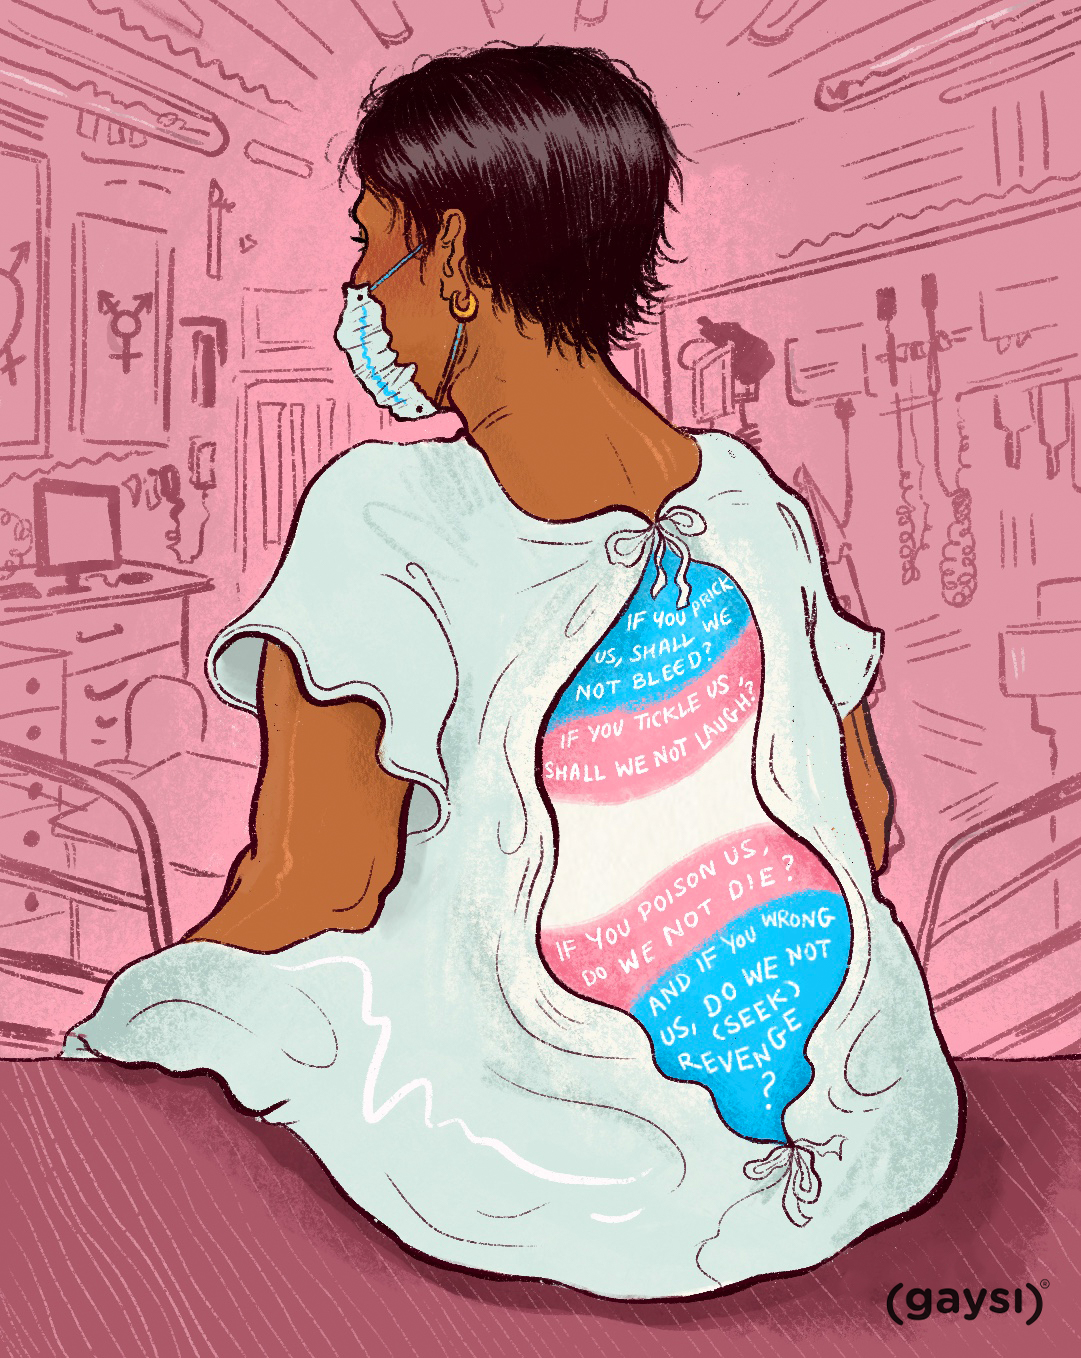 Accessing Gender-Affirming Healthcare Services In India: A Lived Experience